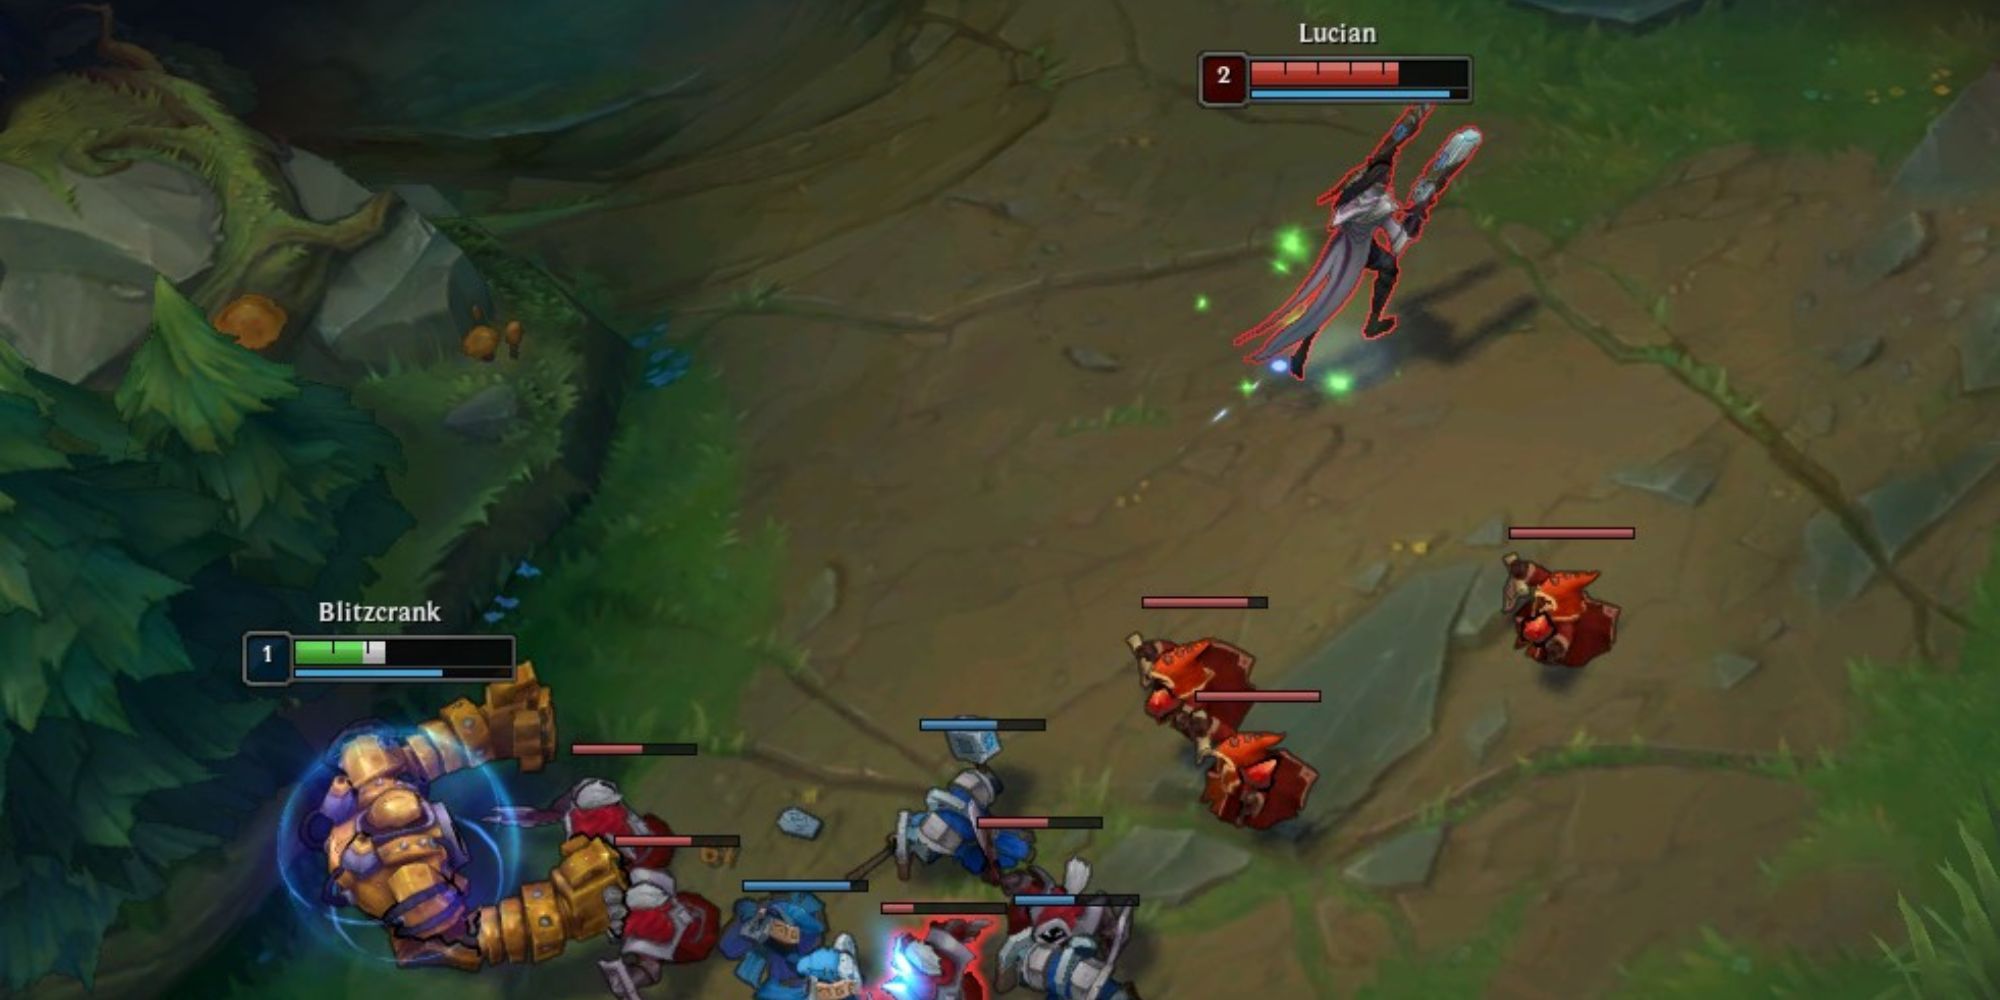 Blitzcrank And Lucian Trading In Lane In League Of Legends